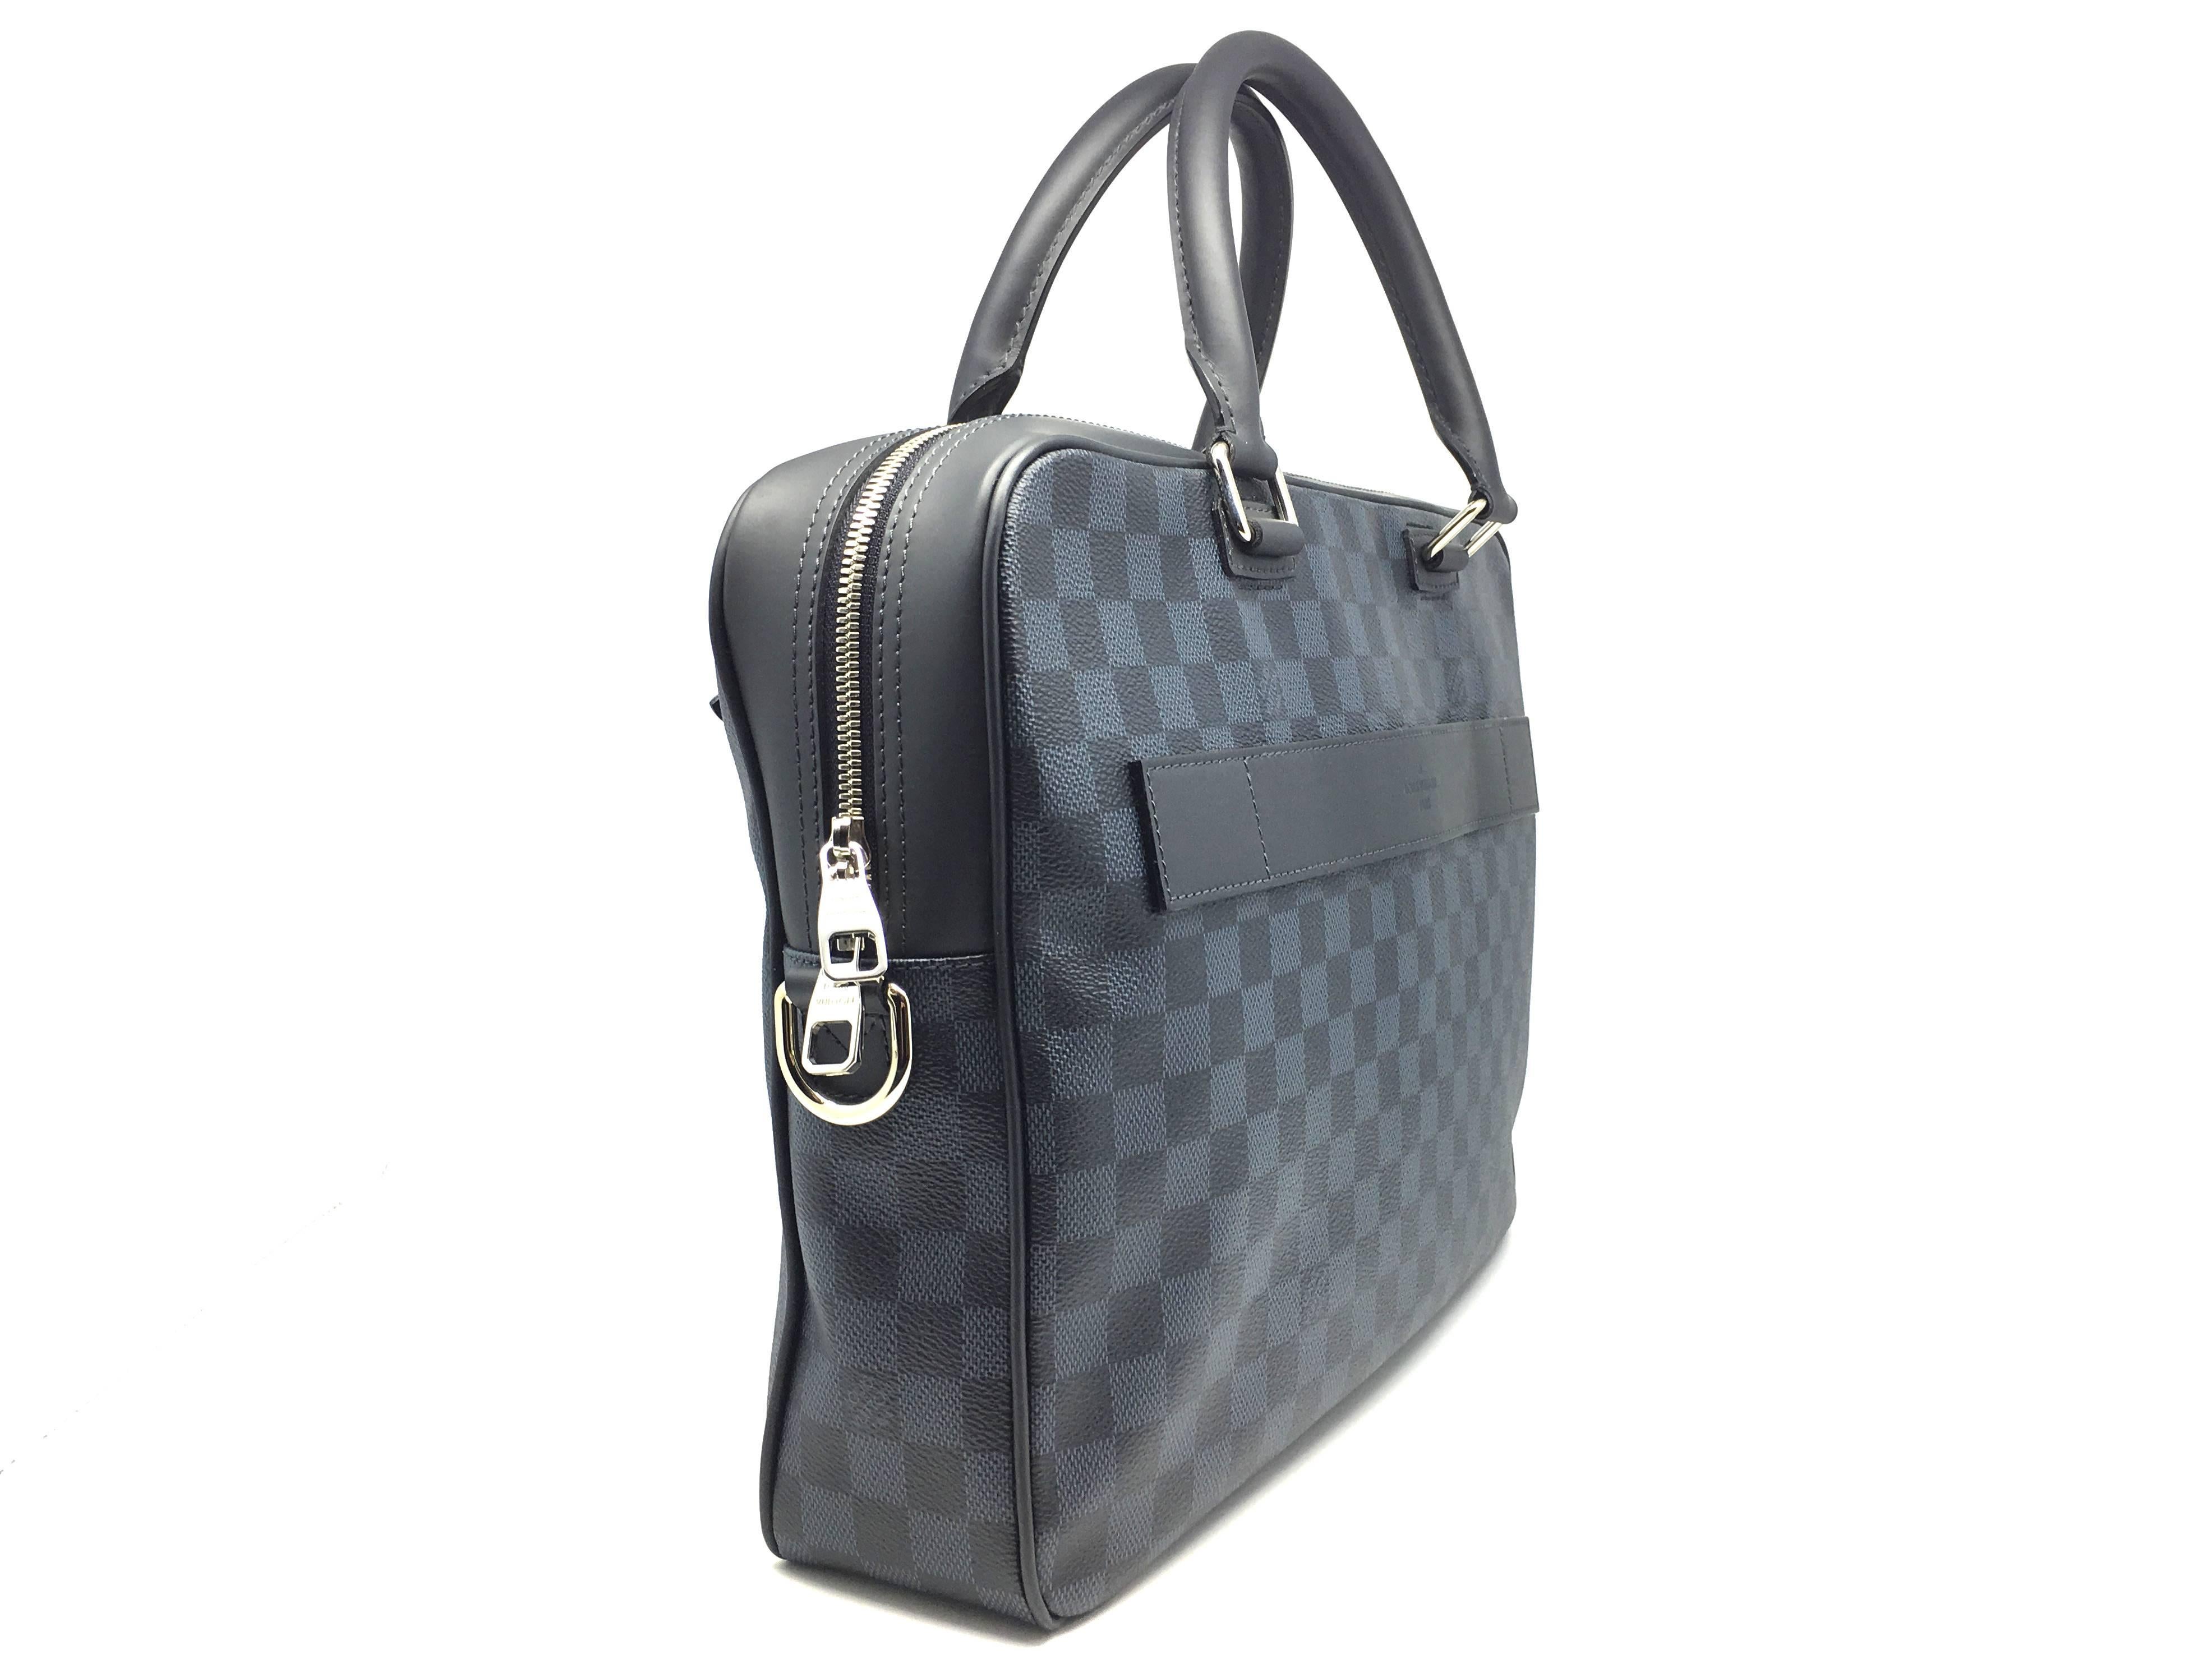 Color: Black/ Blue 
Material: Damier Graphite

Condition: Rank A 
Overall: Good, few minor defects
Surface: Good
Corners: Minor Scratches
Edges: Minor Stains
Handles/Straps: Minor Stains
Hardware: Minor Scratches

Dimension: W39 × H28.5 ×